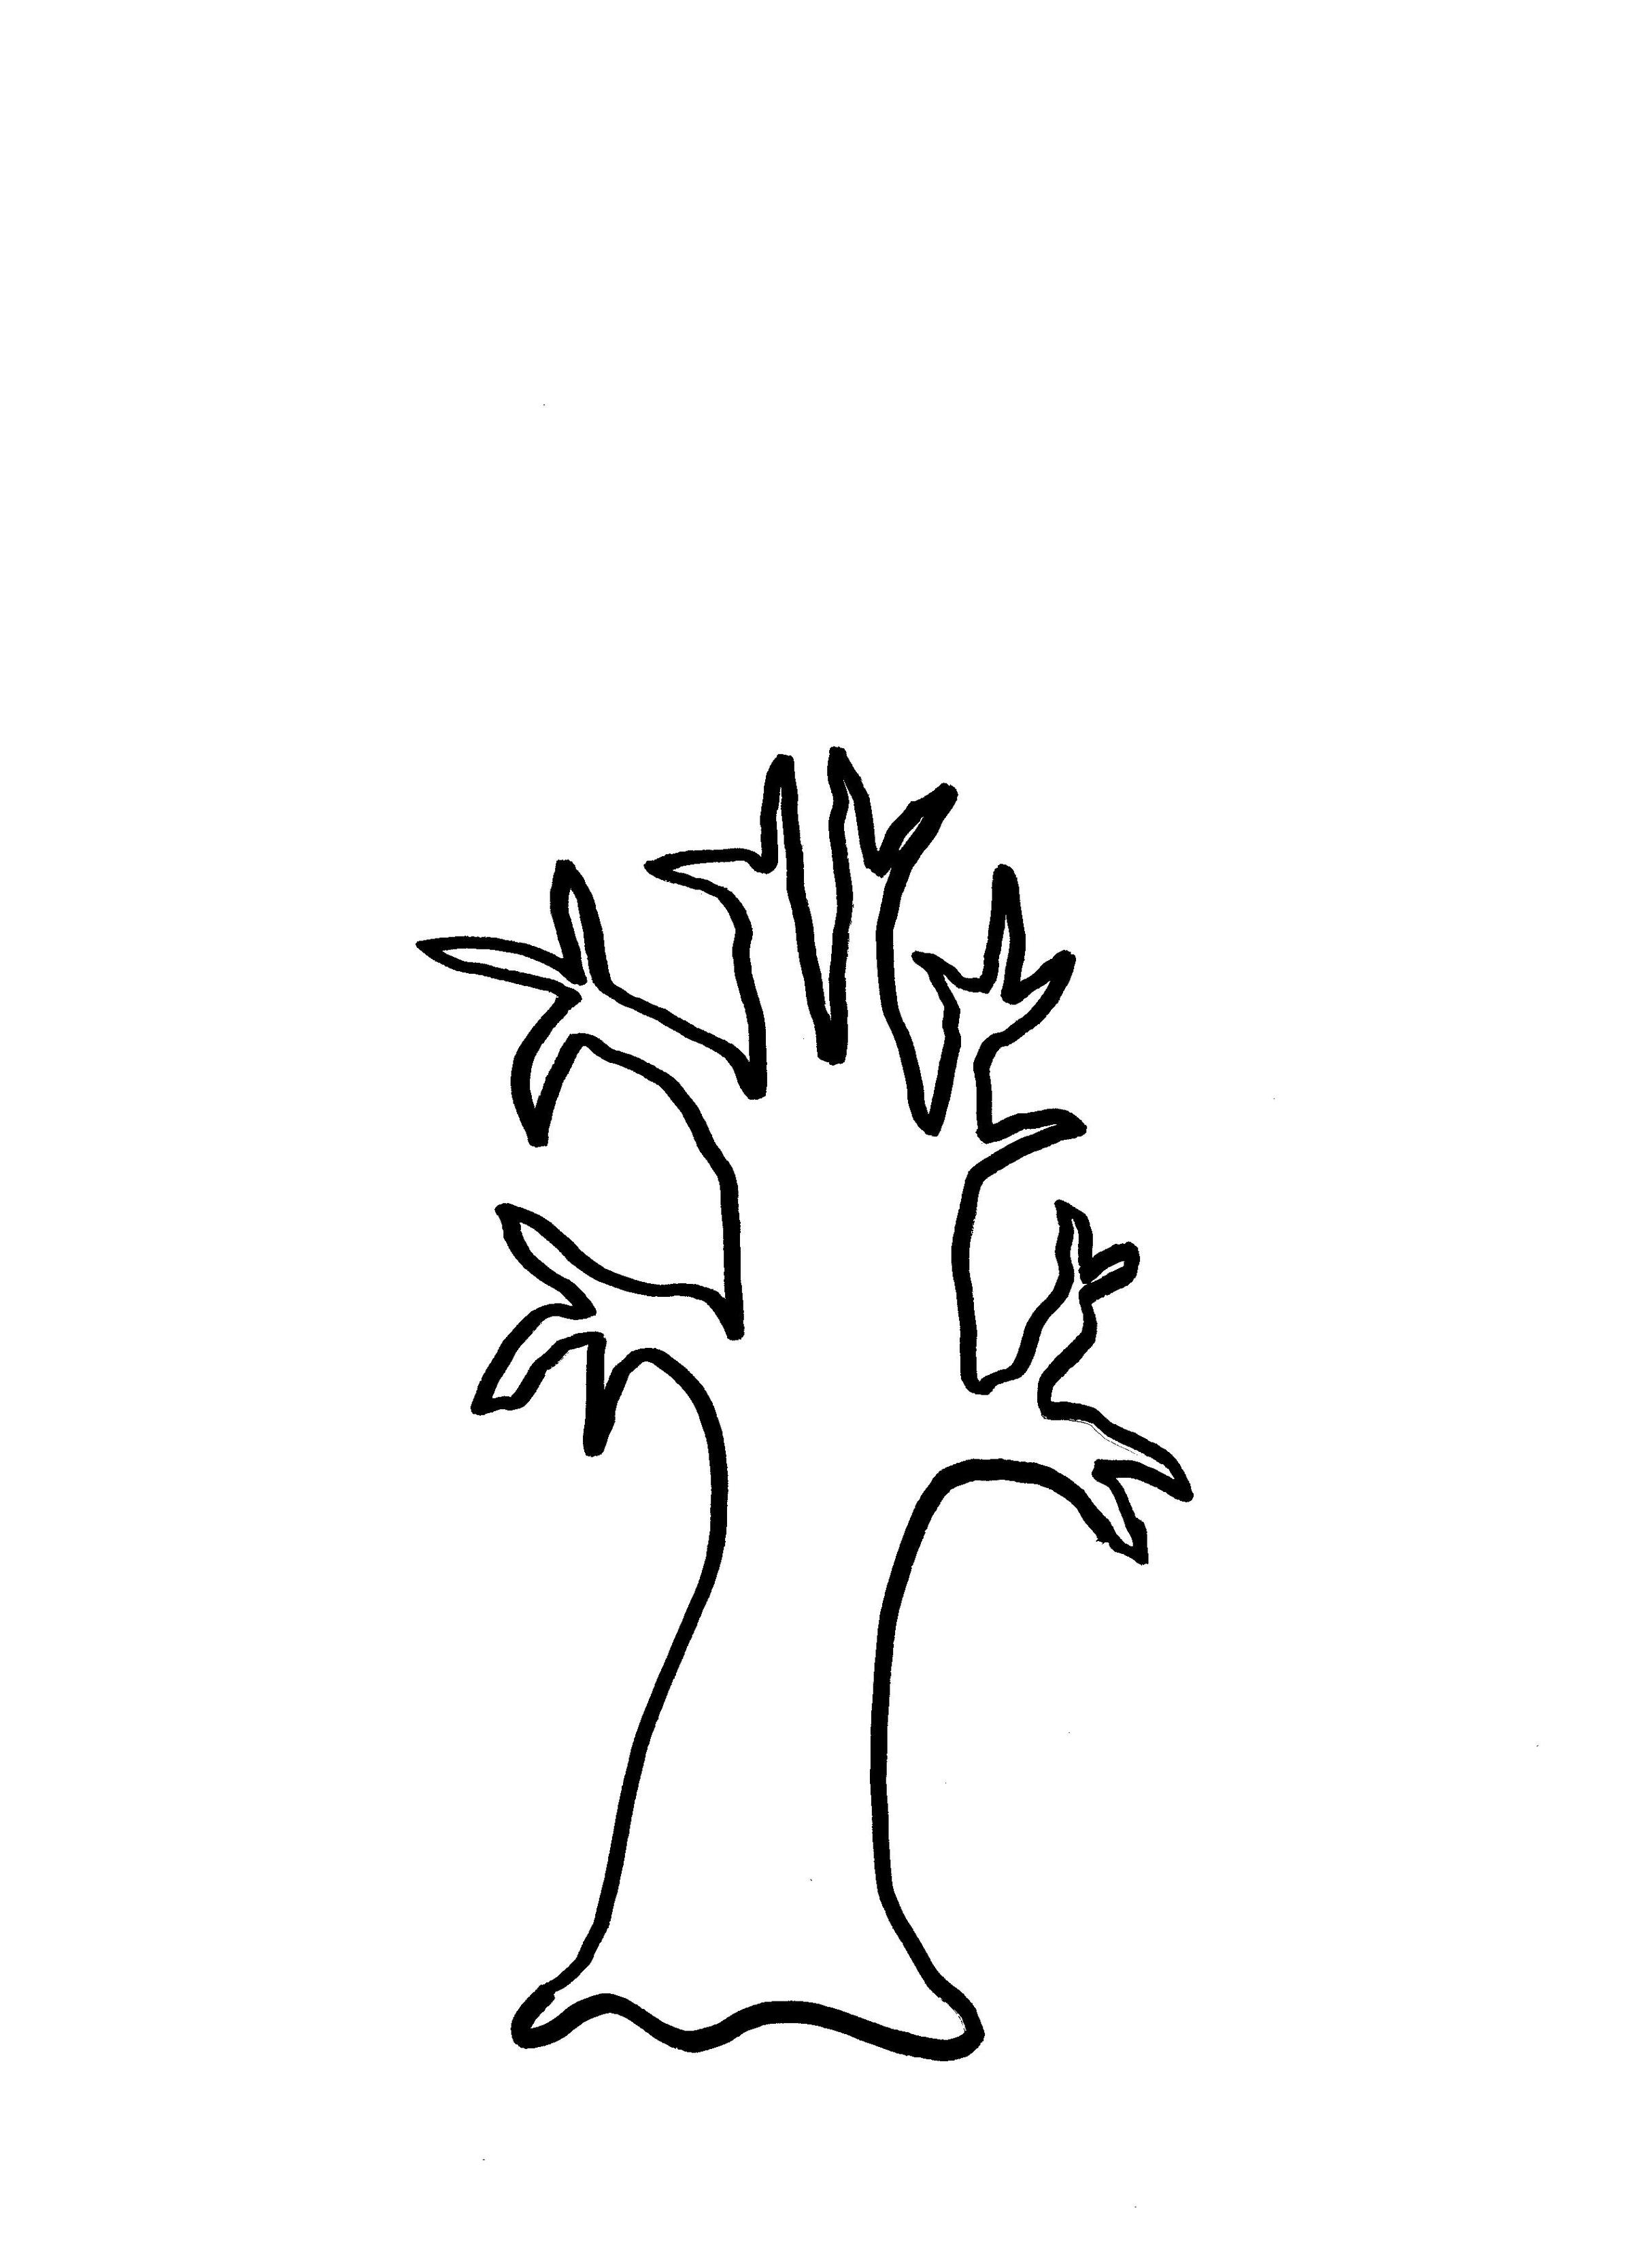 Coloring Page Of A Tree Trunk - Coloring Page